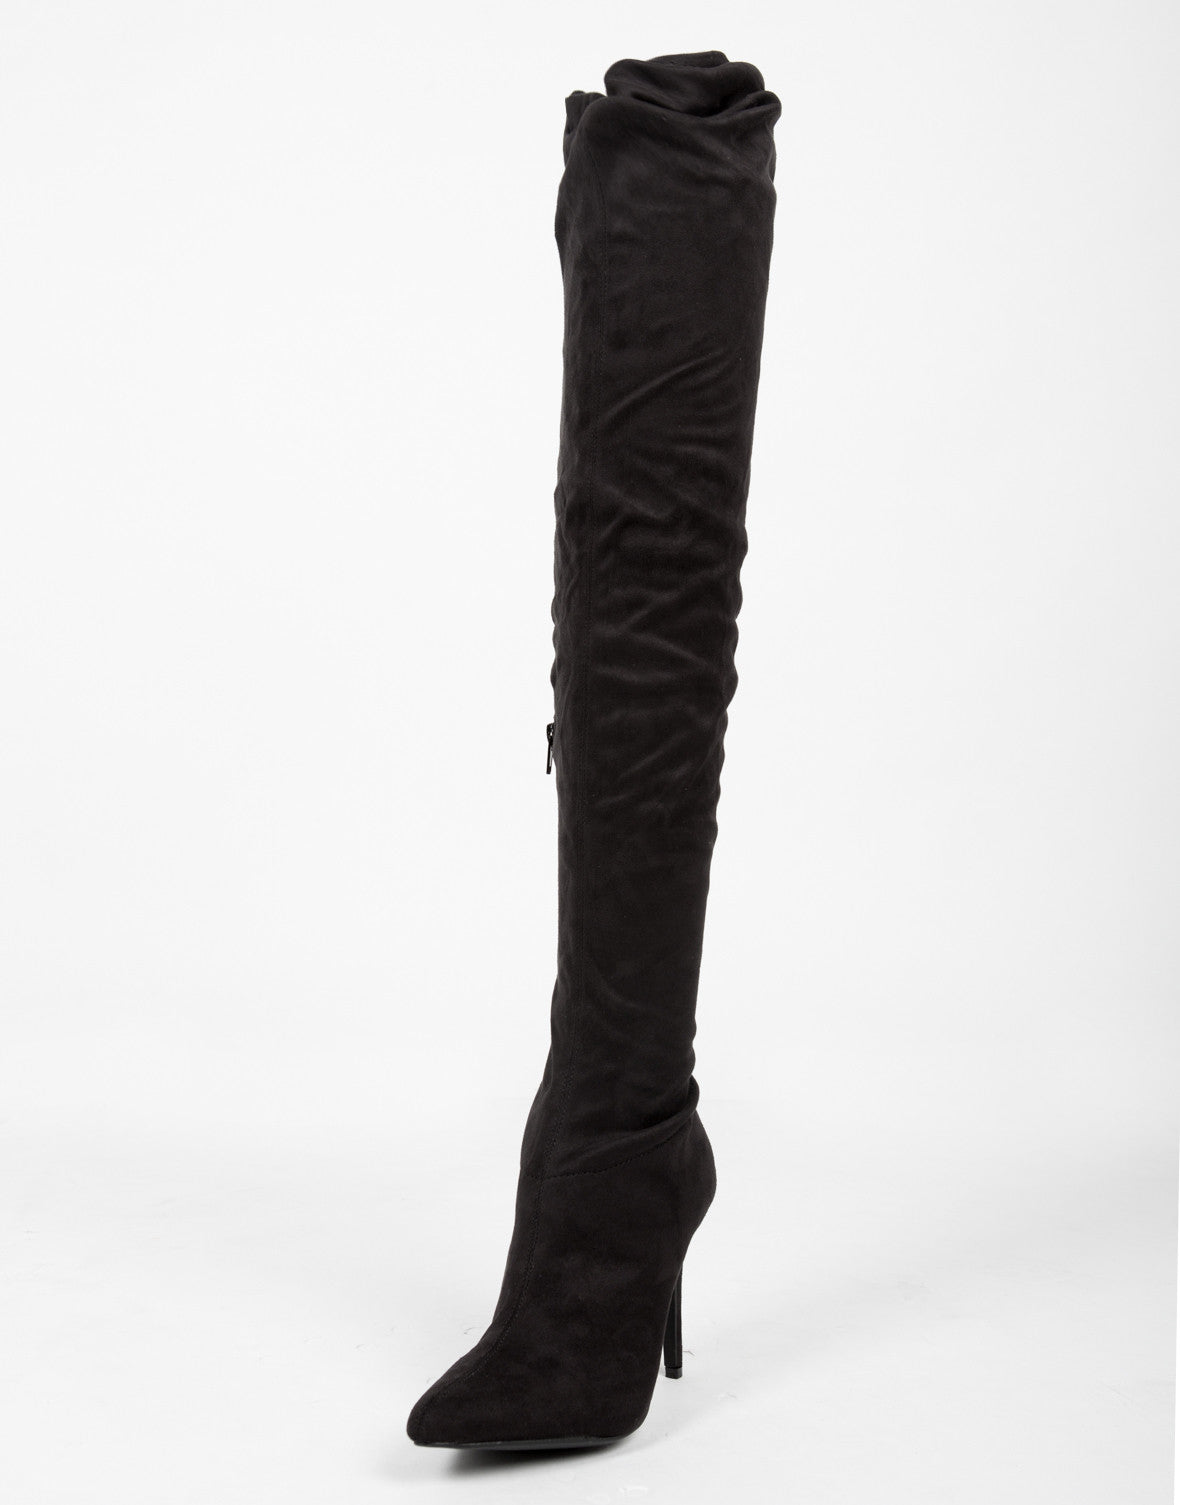 Thigh High Suede Heel Boots - Black Suede Boots - Black Heels – 2020AVE